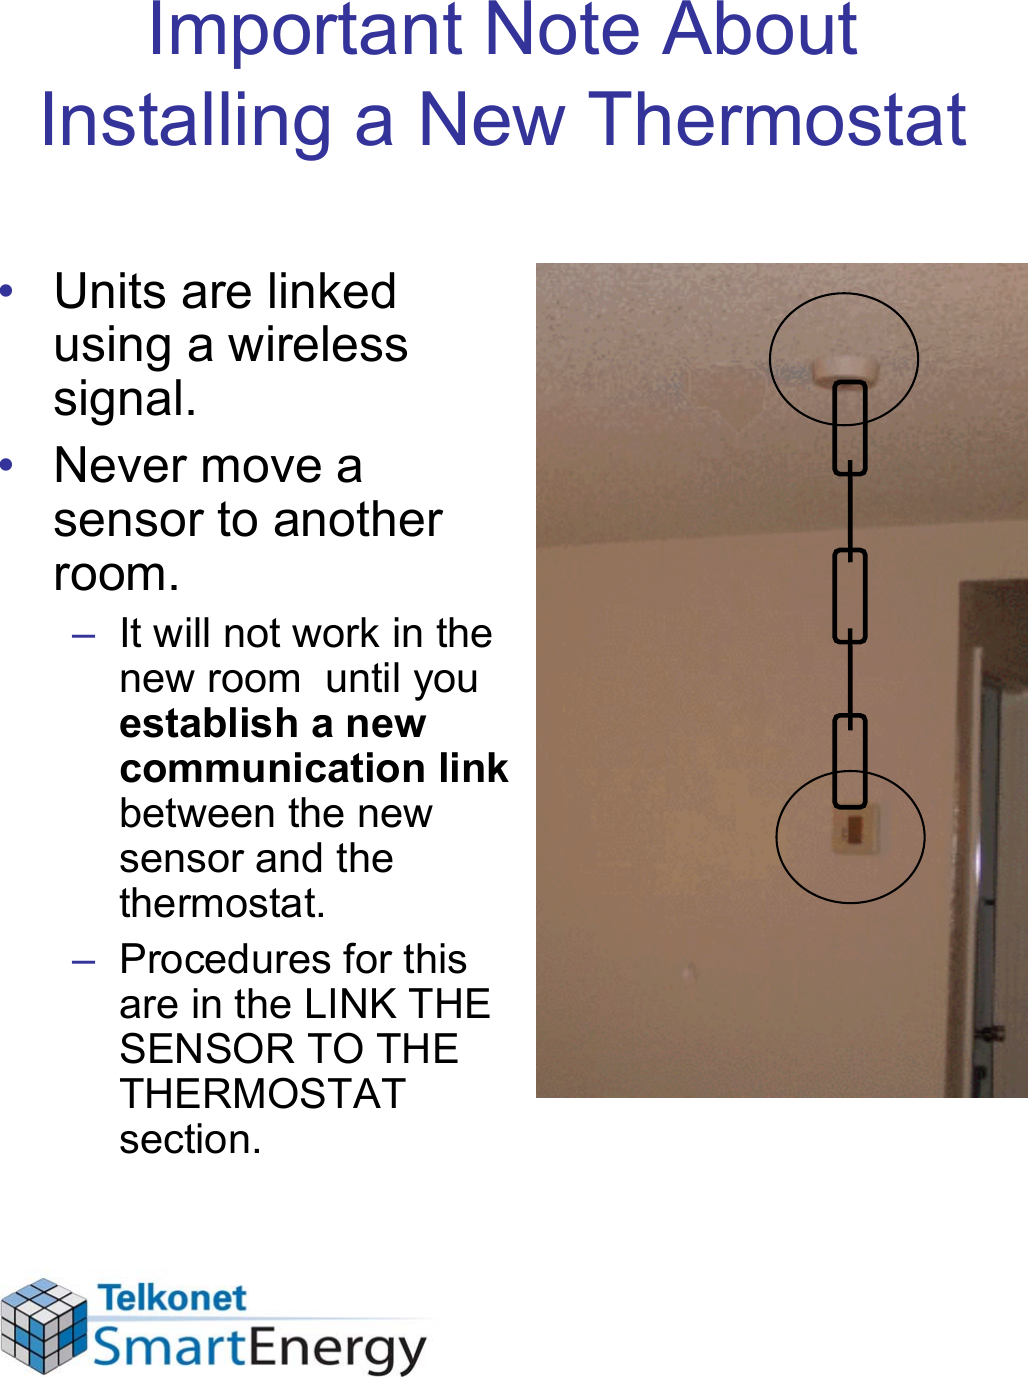 Important Note About Installing a New Thermostat• Units are linked using a wireless signal. • Never move a sensor to another room. – It will not work in the new room  until you establish a new communication link between the new sensor and the thermostat. – Procedures for this are in the LINK THE SENSOR TO THE THERMOSTAT section.